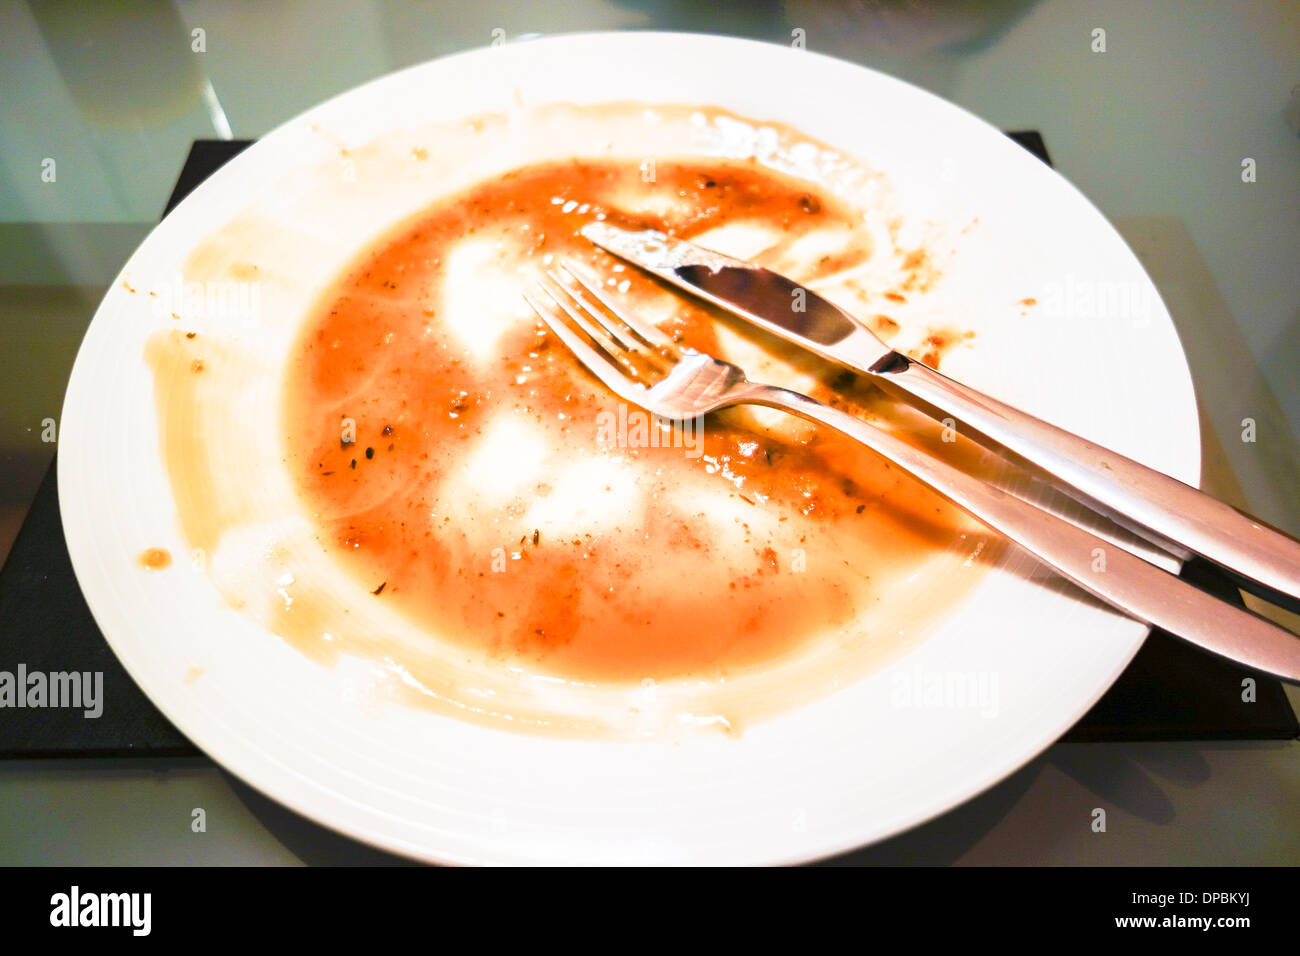 Empty plate from a just finished meal covered with food residue Stock Photo